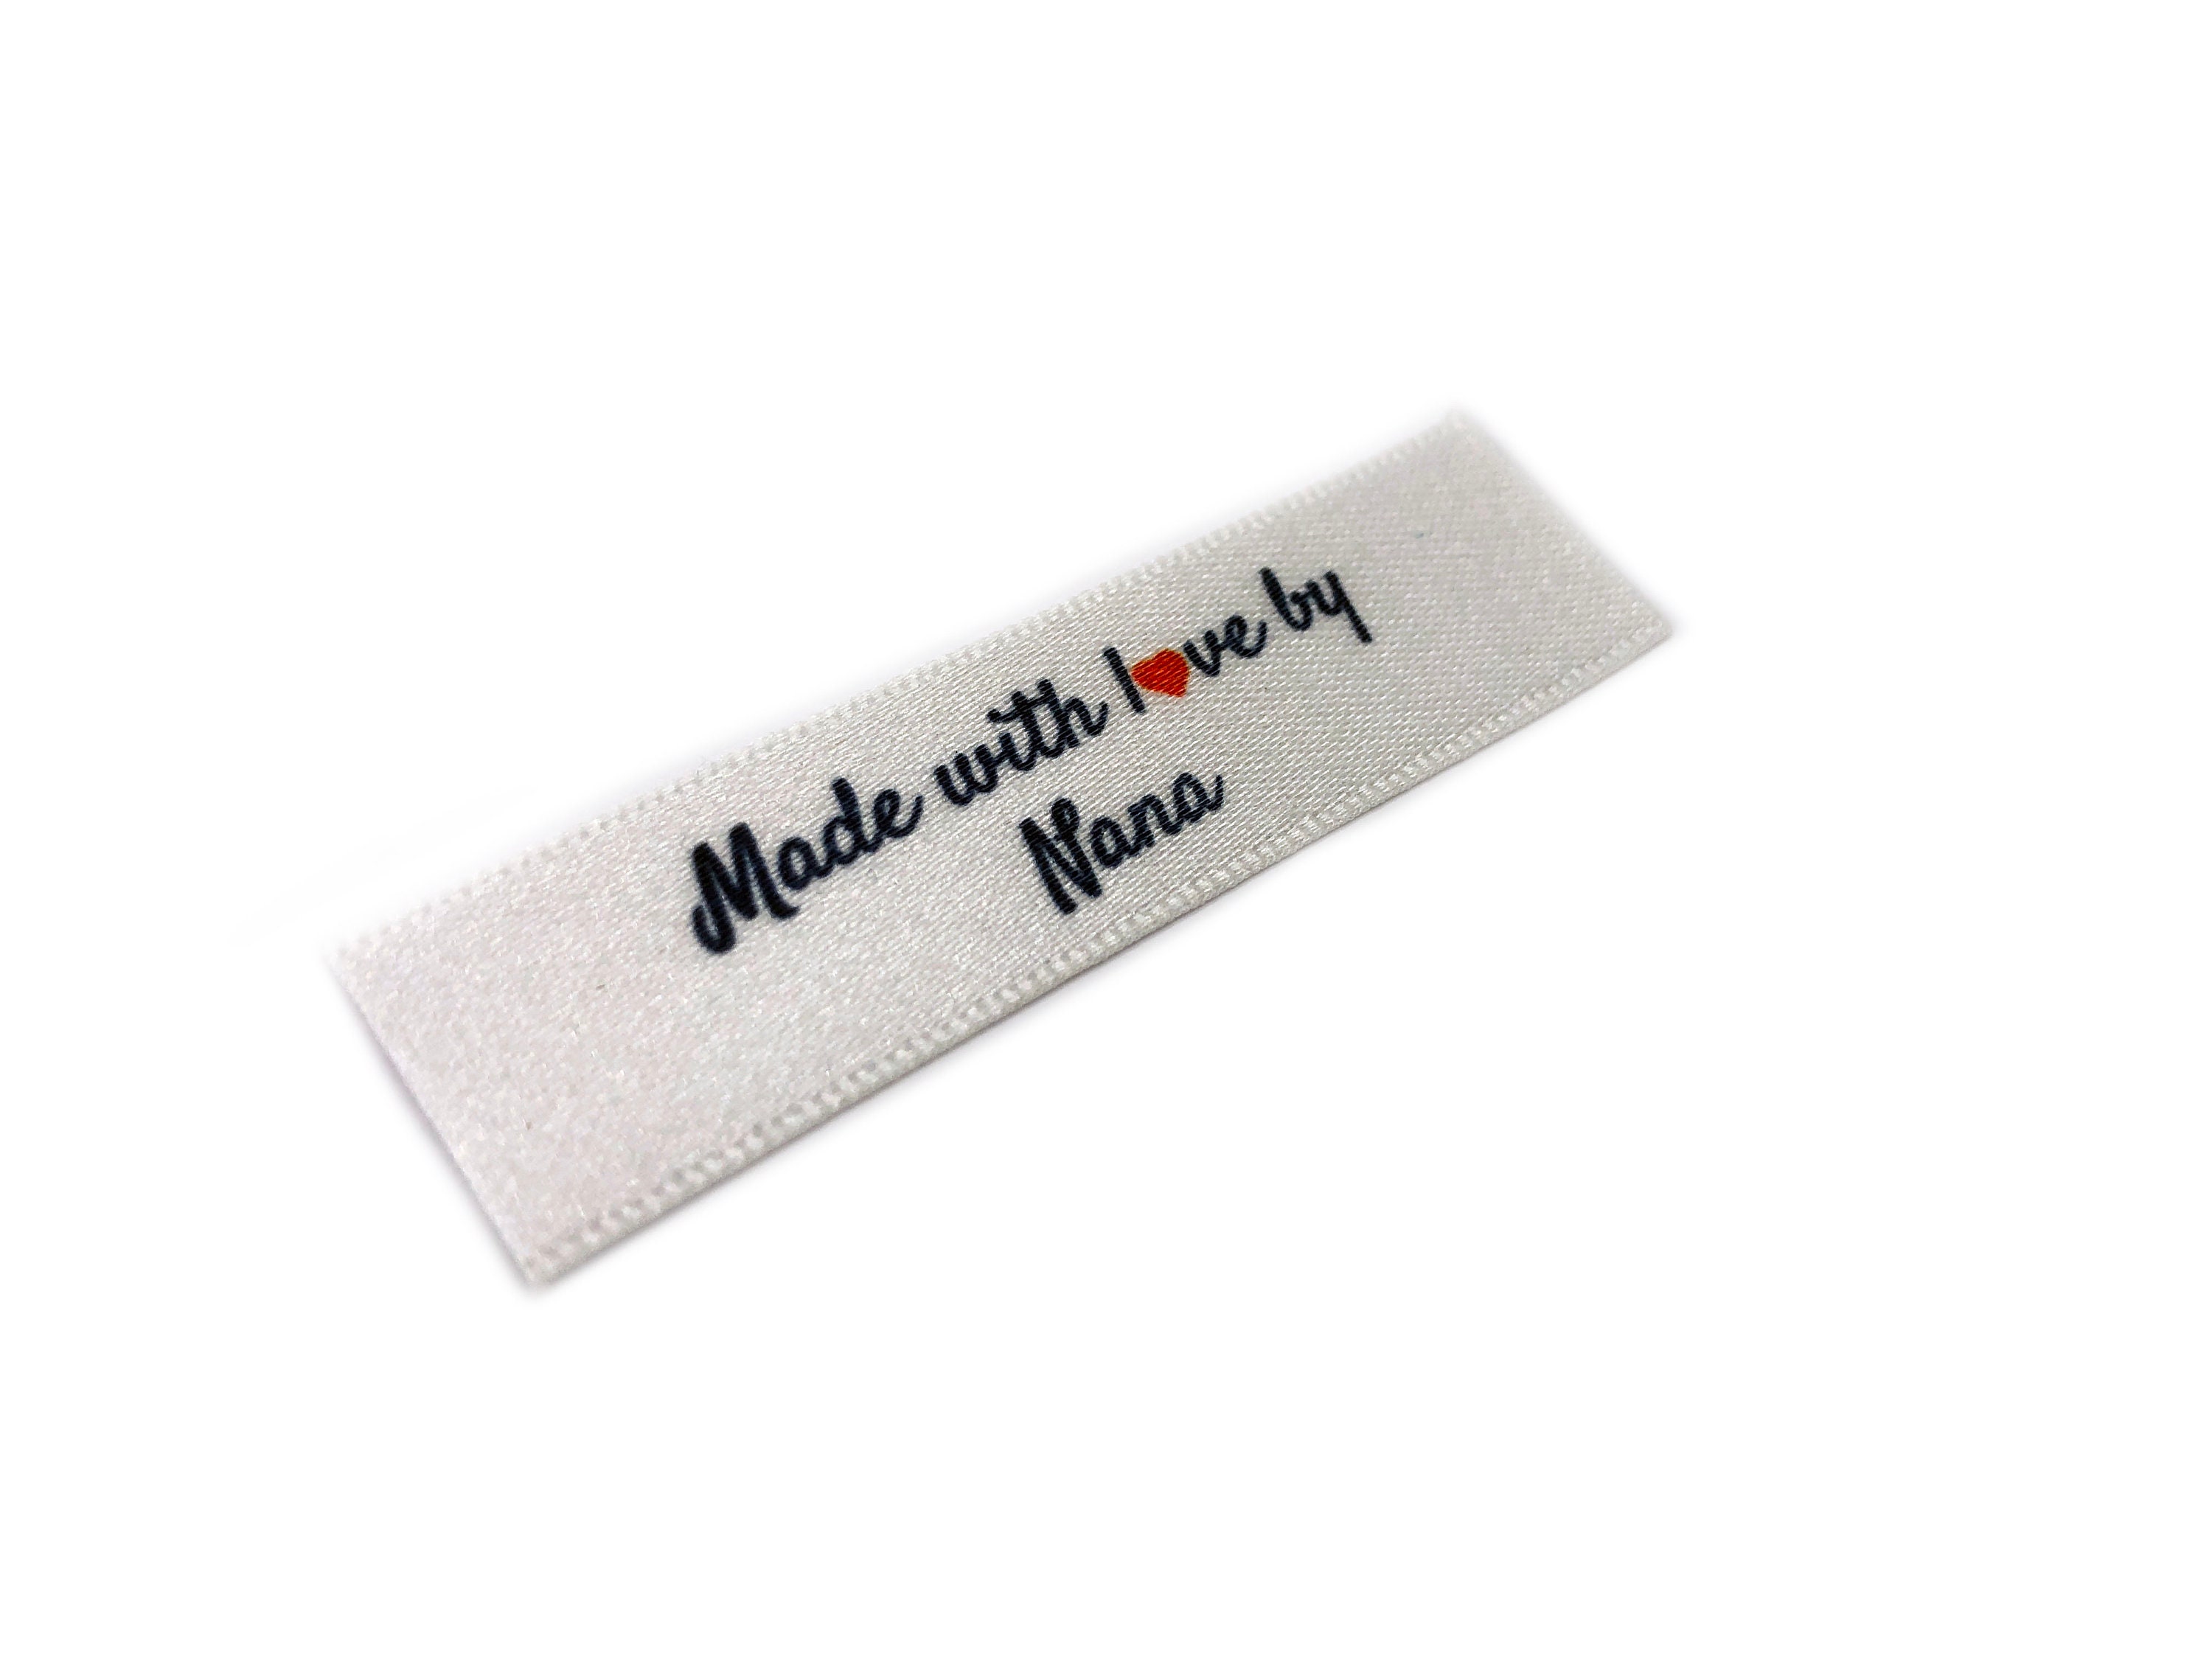 Sew on Name Tags / Clothing Labels White Organic Cotton Labels for Clothing  